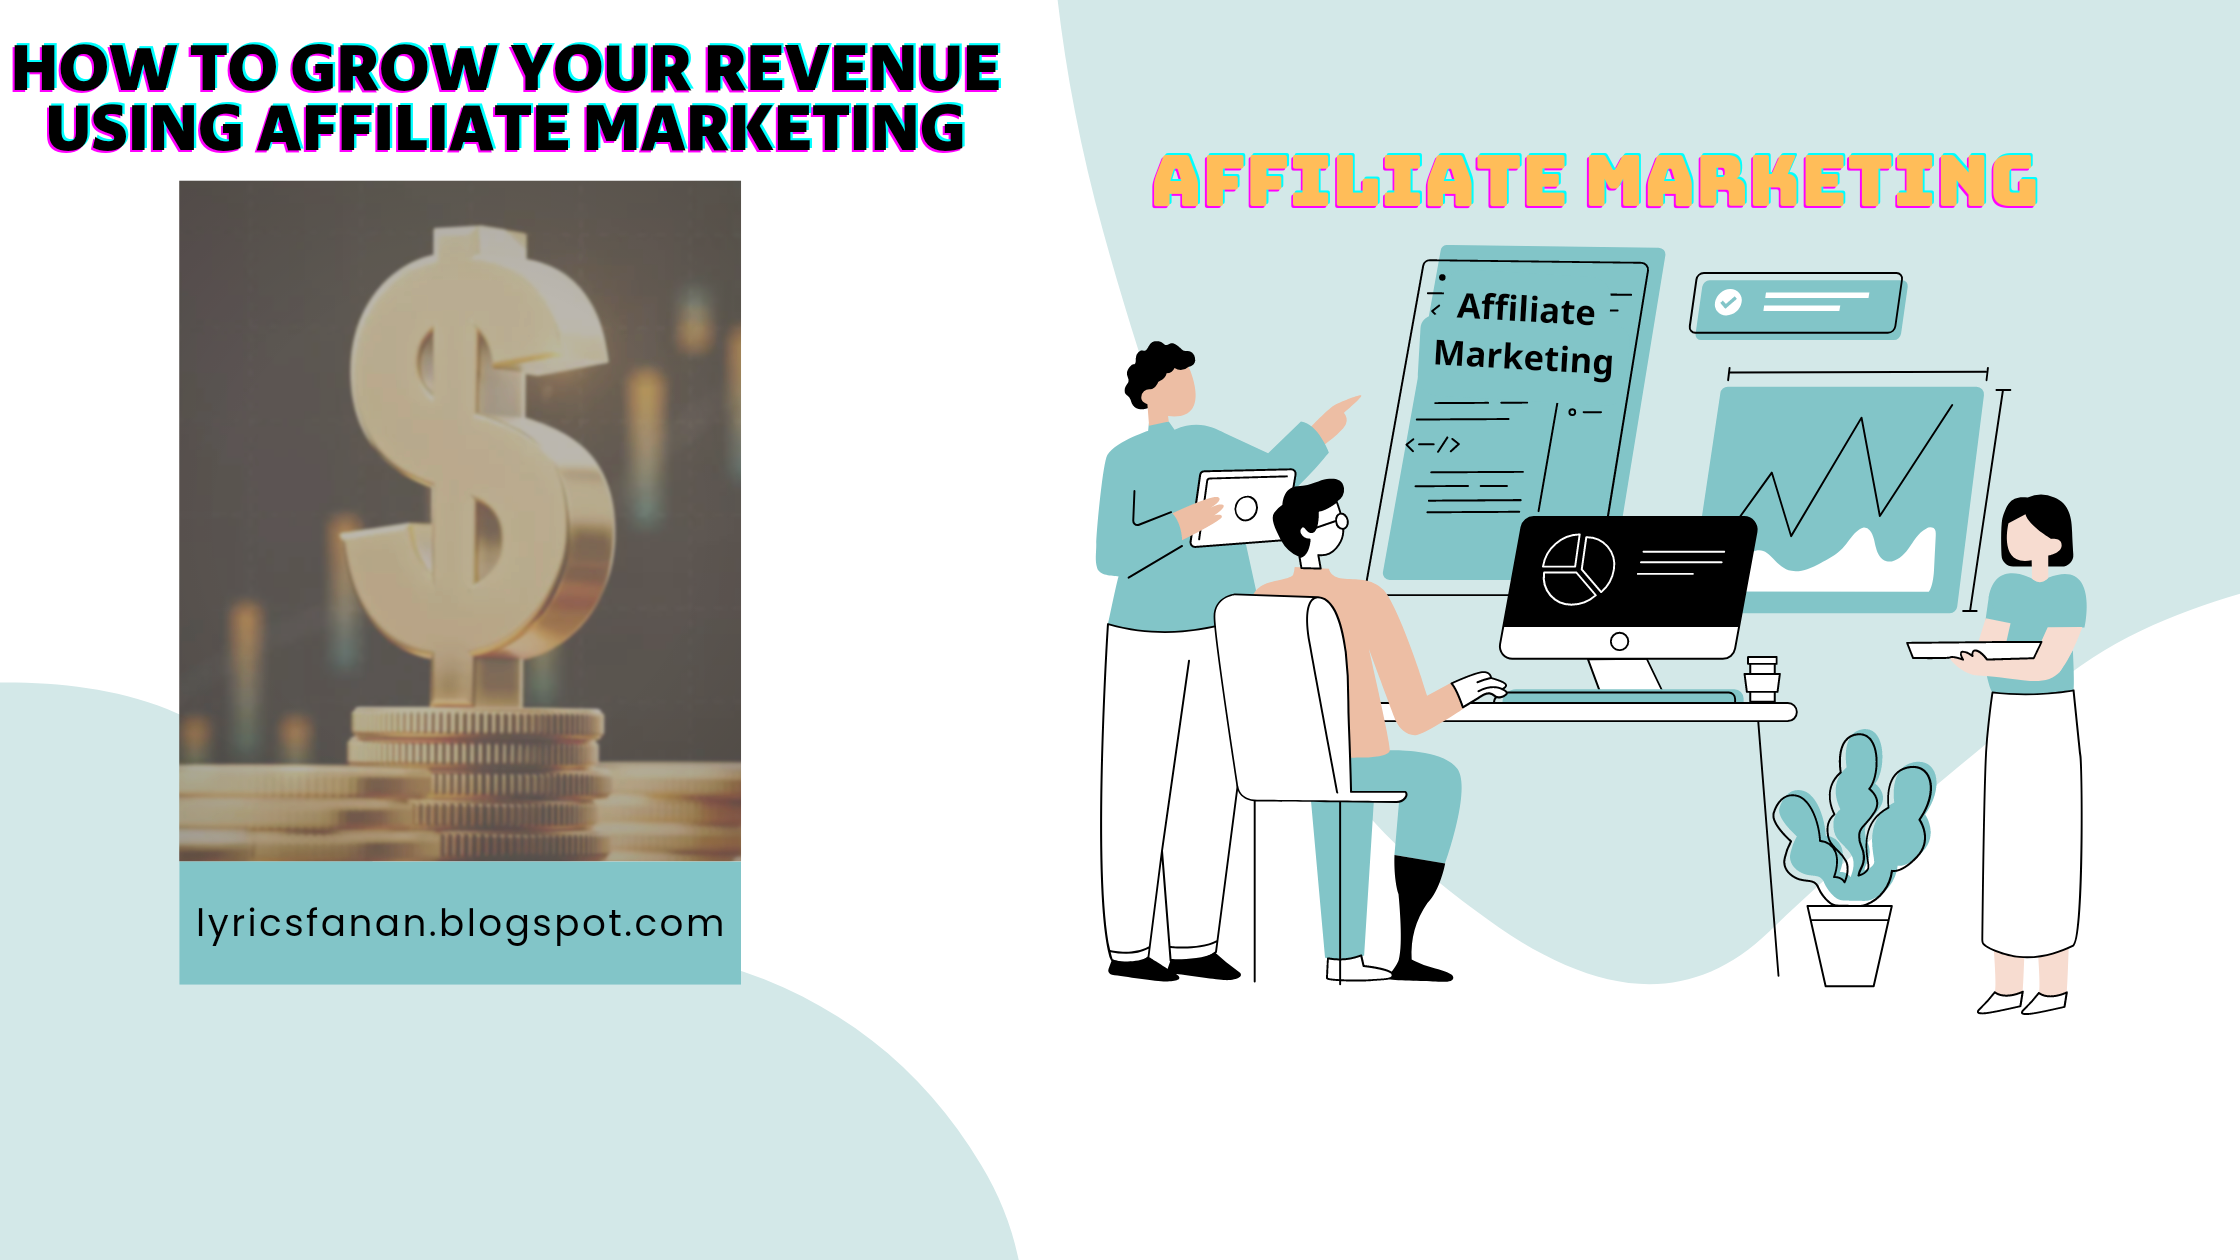 affiliate marketing,affiliate marketing for beginners,how to start affiliate marketing,how to make money with affiliate marketing,affiliate marketing tutorial,how to affiliate marketing,how to start affiliate marketing step by step,what is affiliate marketing,amazon affiliate marketing,how to get started affiliate marketing,affiliate marketing 2022,affiliate marketing 2021,how to start affiliate marketing for beginners,affiliate marketing step by step